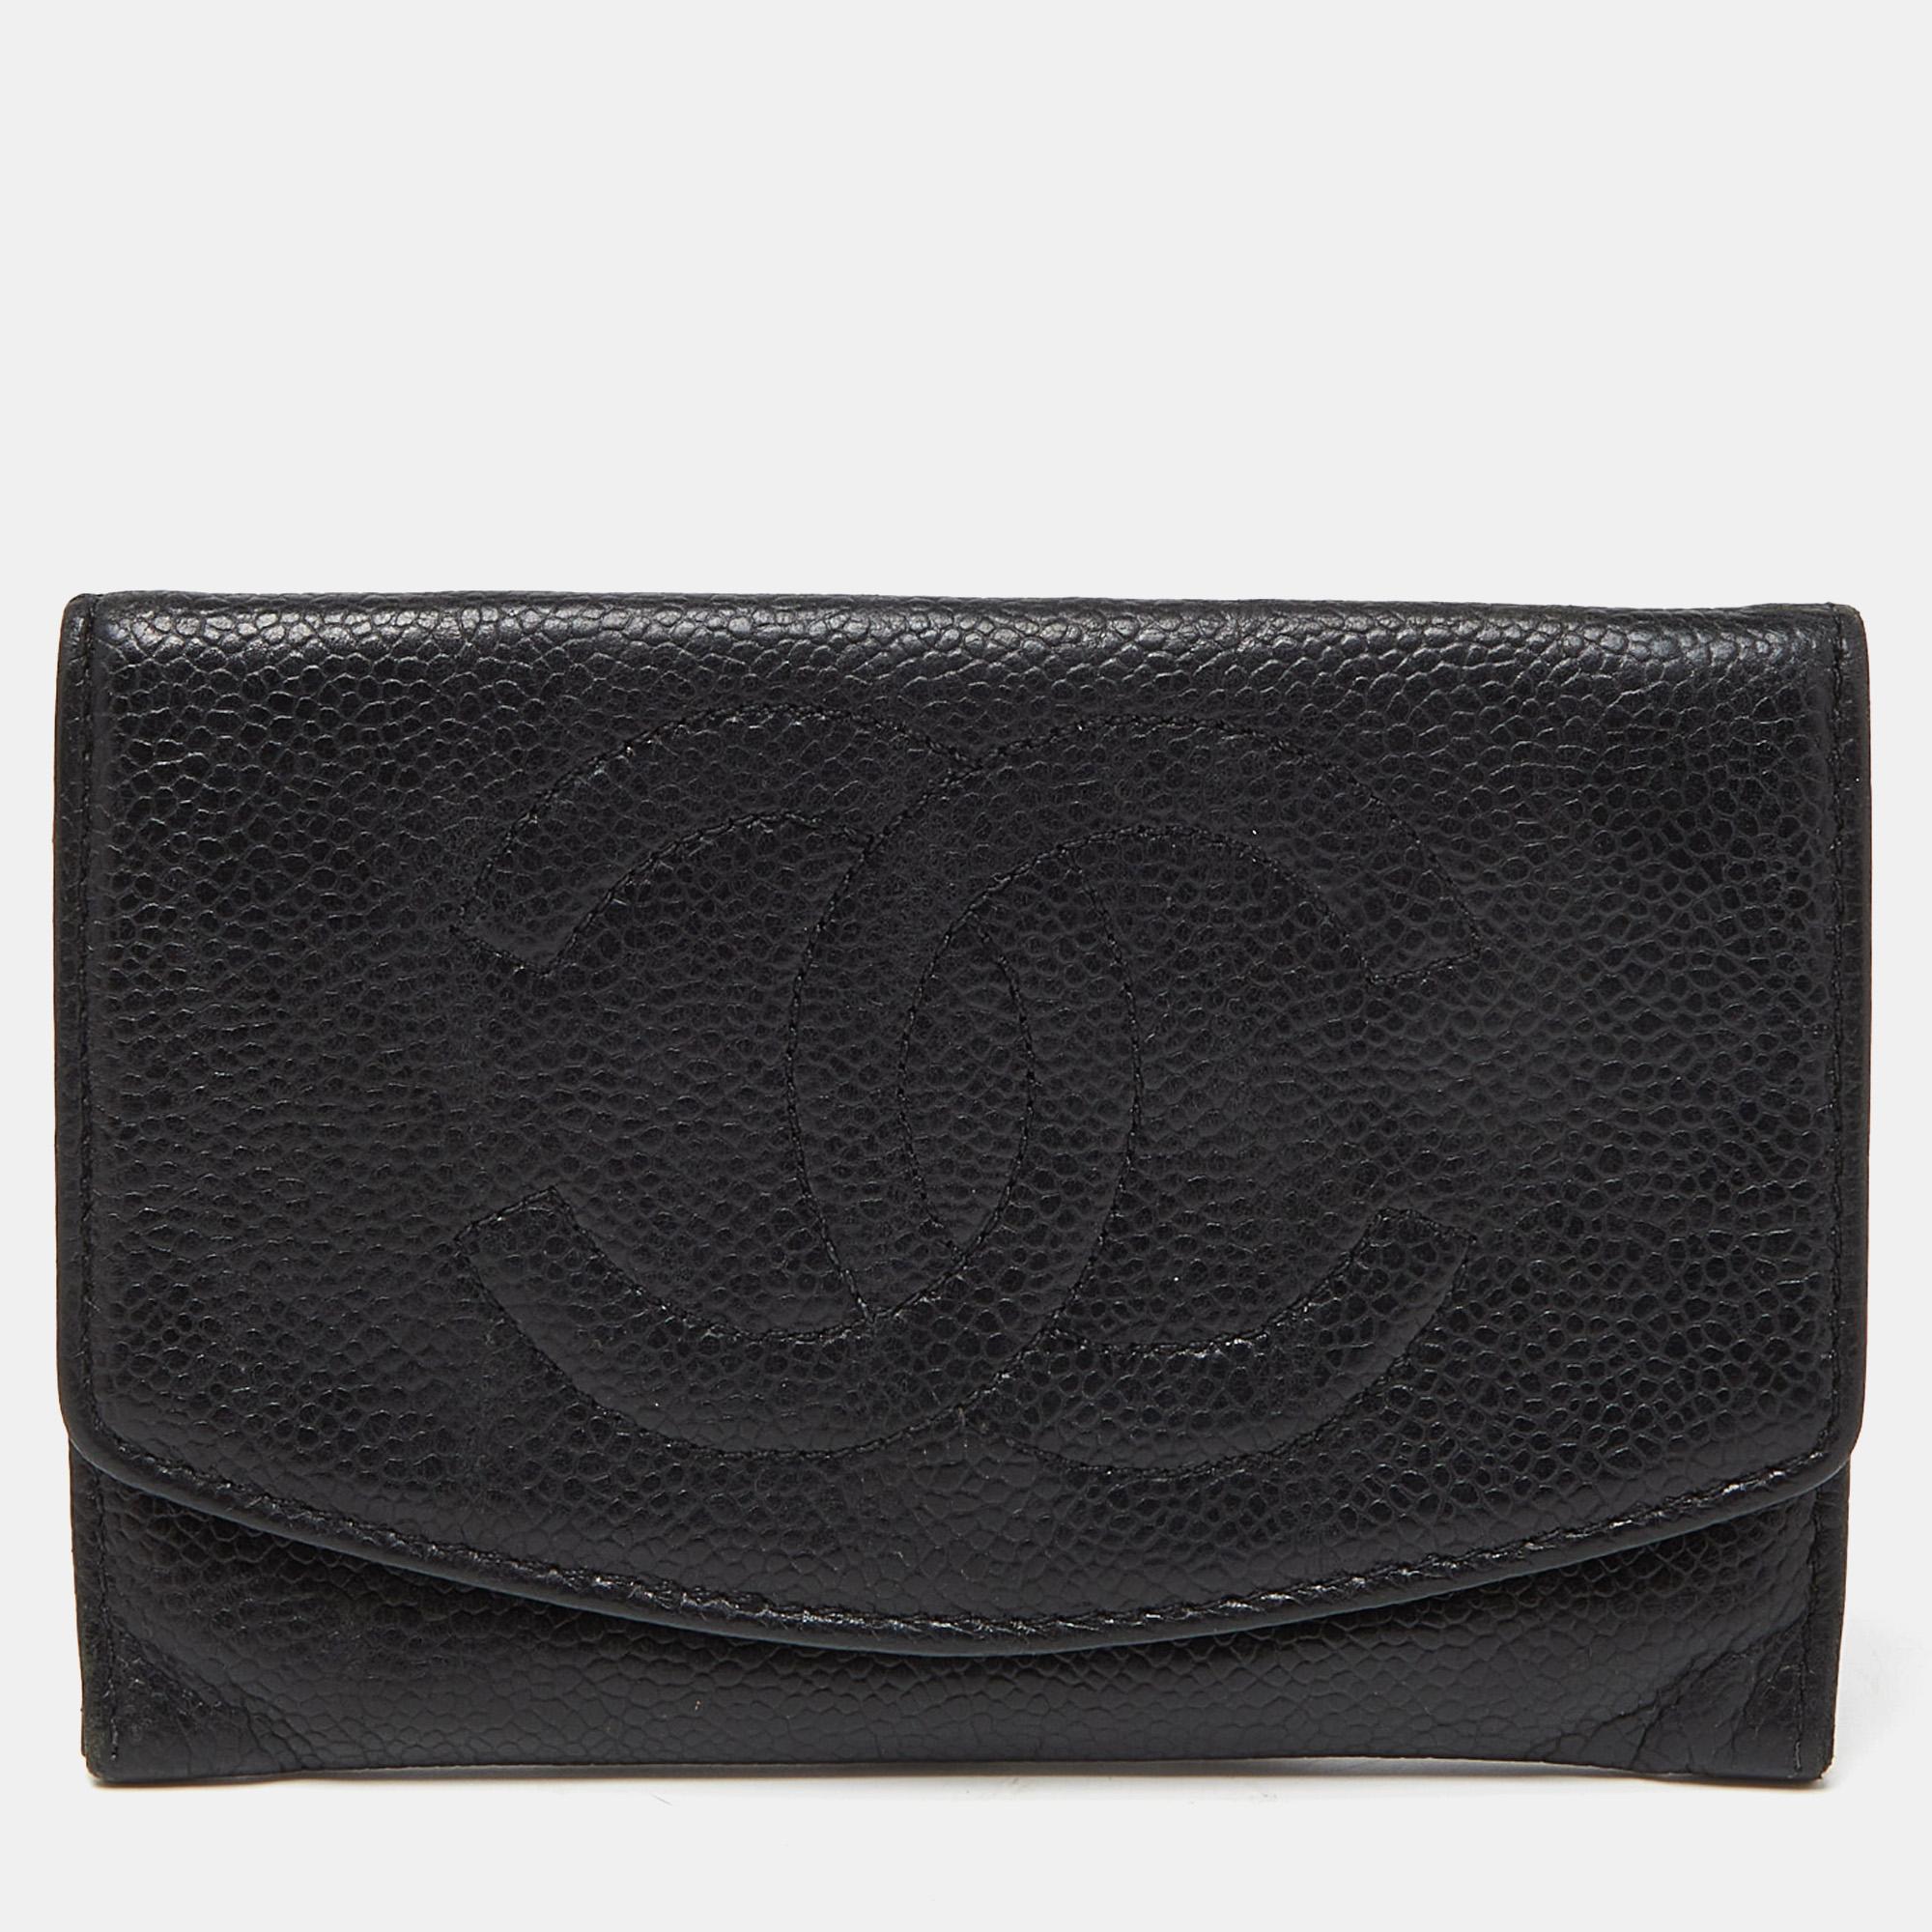 This Chanel CC wallet is an immaculate balance of sophistication and rational utility. It has been designed using prime quality materials and elevated by a sleek finish. The creation is equipped with ample space for your monetary